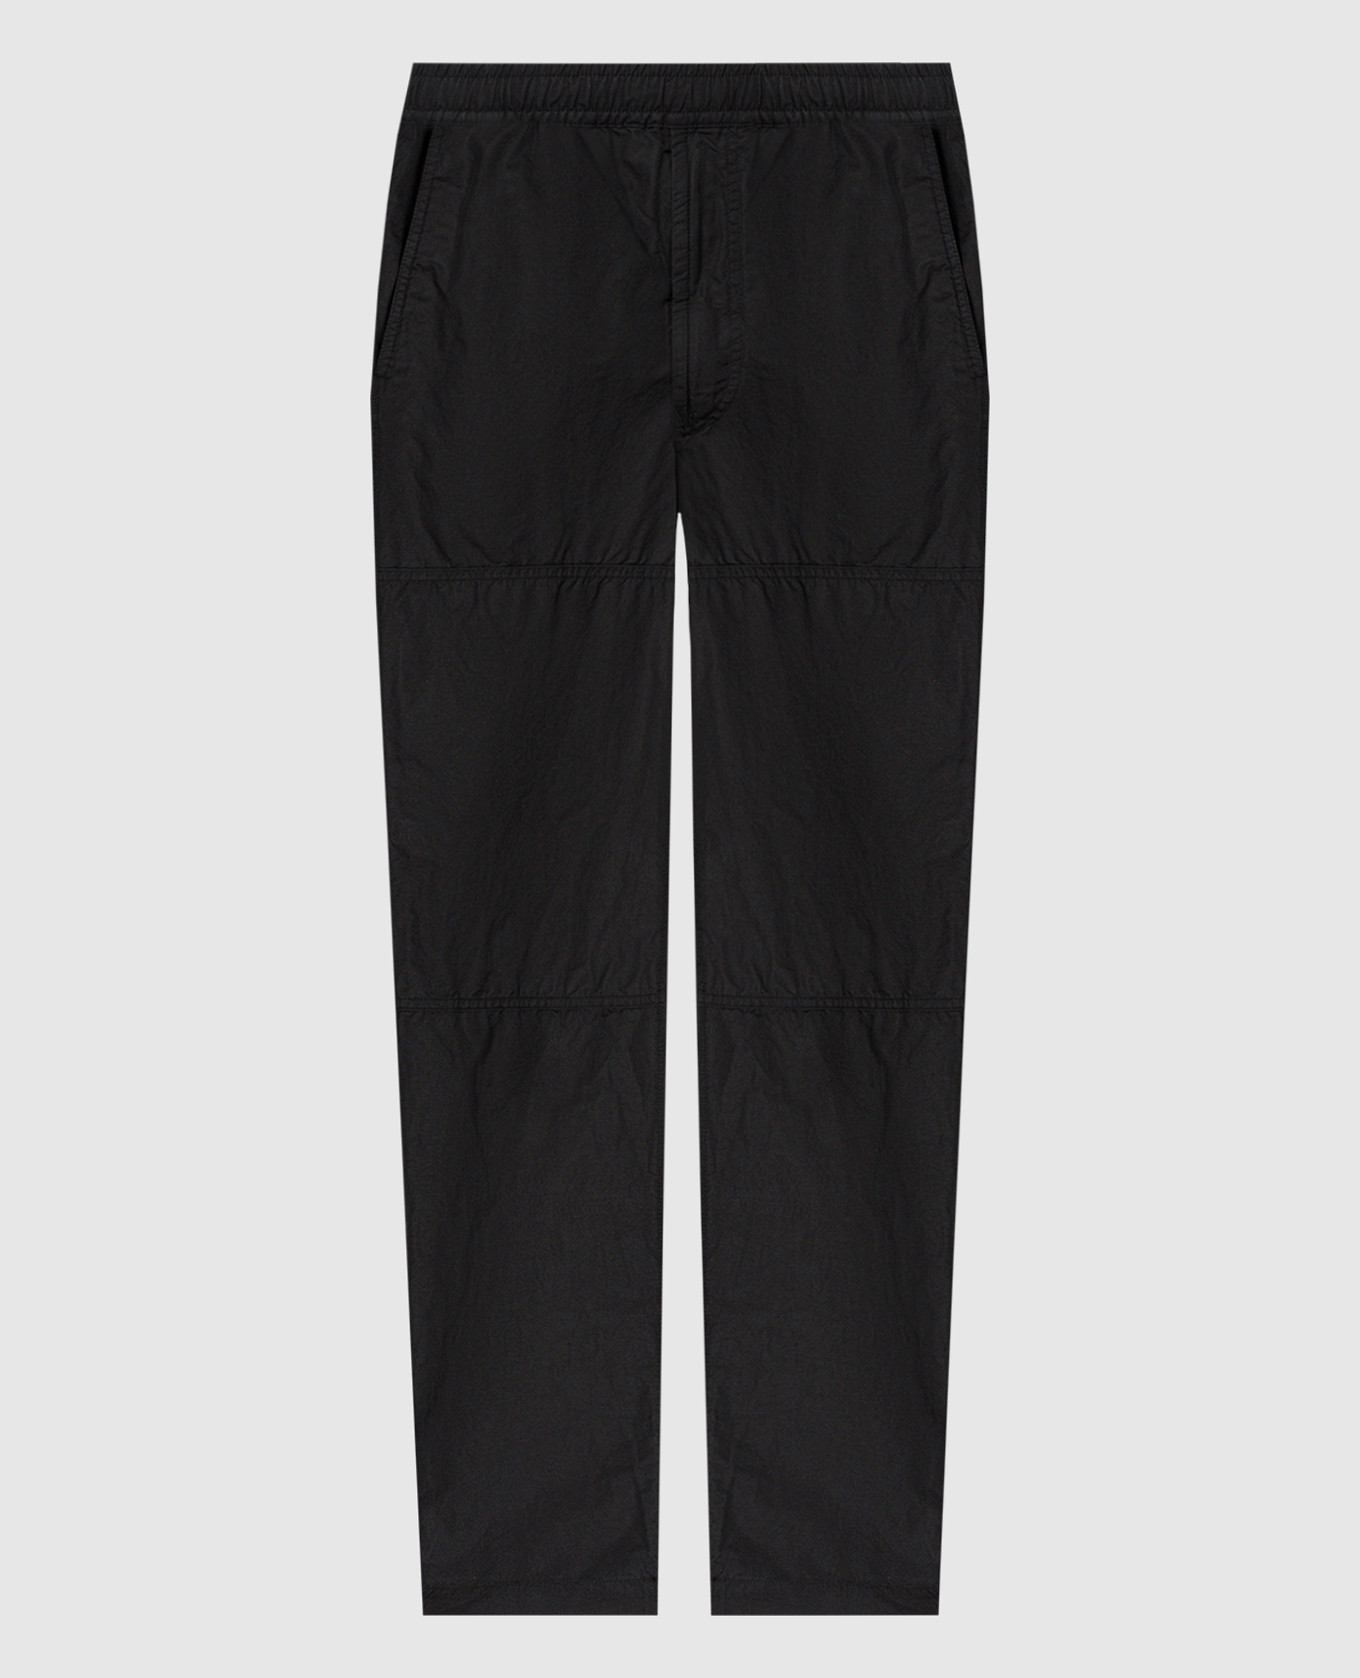 Black linen trousers with logo patch